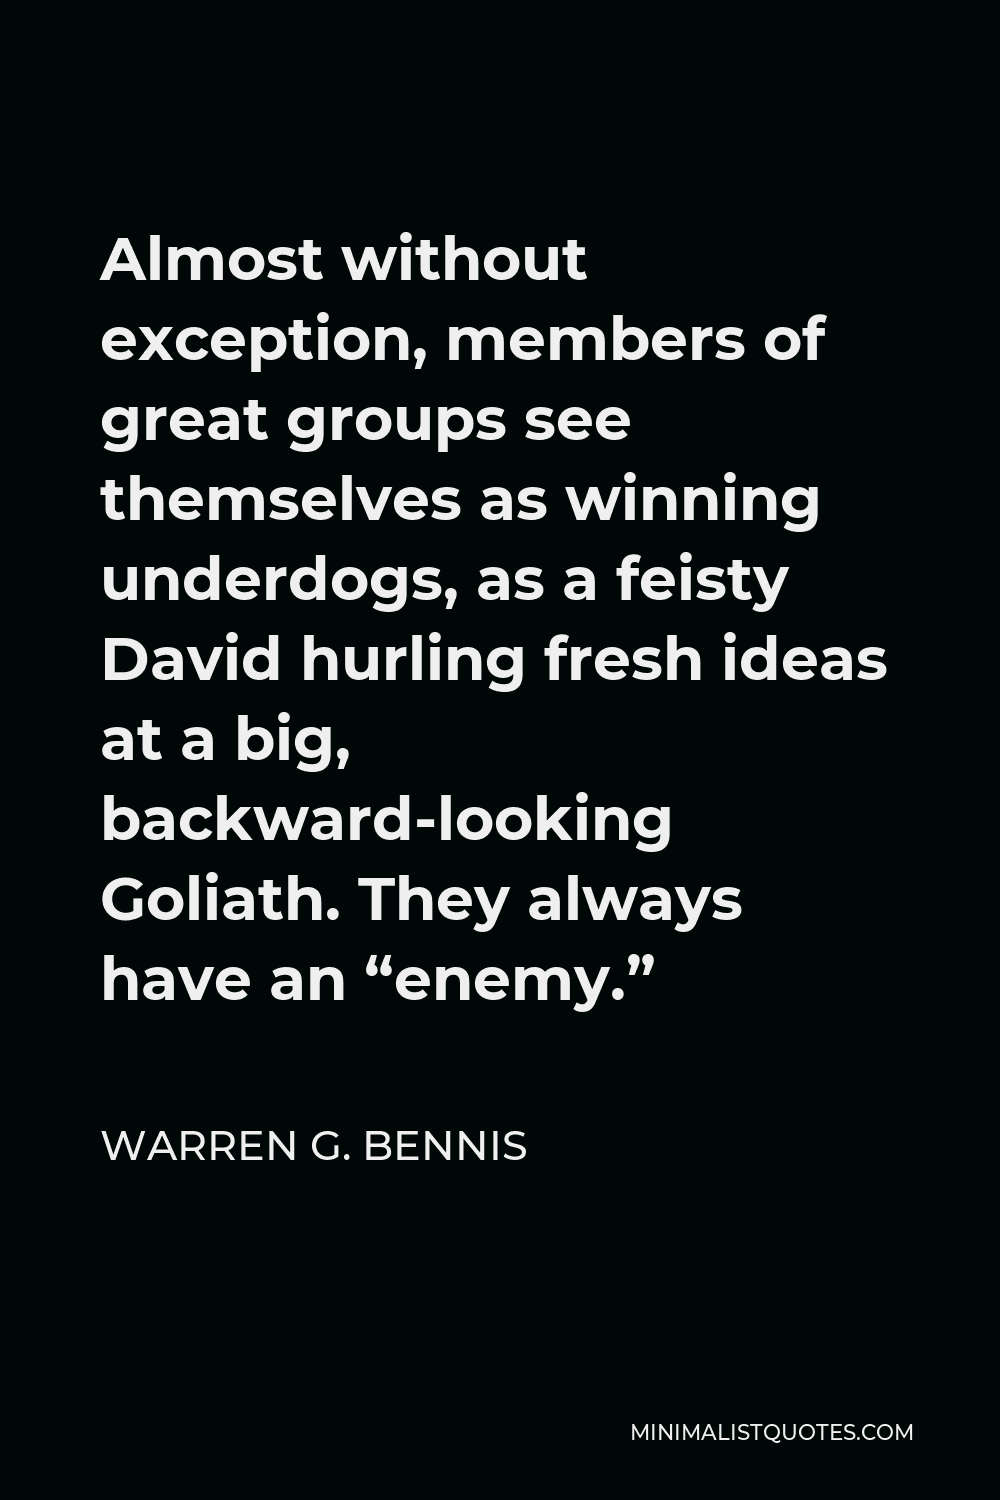 Warren G. Bennis Quote - Almost without exception, members of great groups see themselves as winning underdogs, as a feisty David hurling fresh ideas at a big, backward-looking Goliath. They always have an “enemy.”